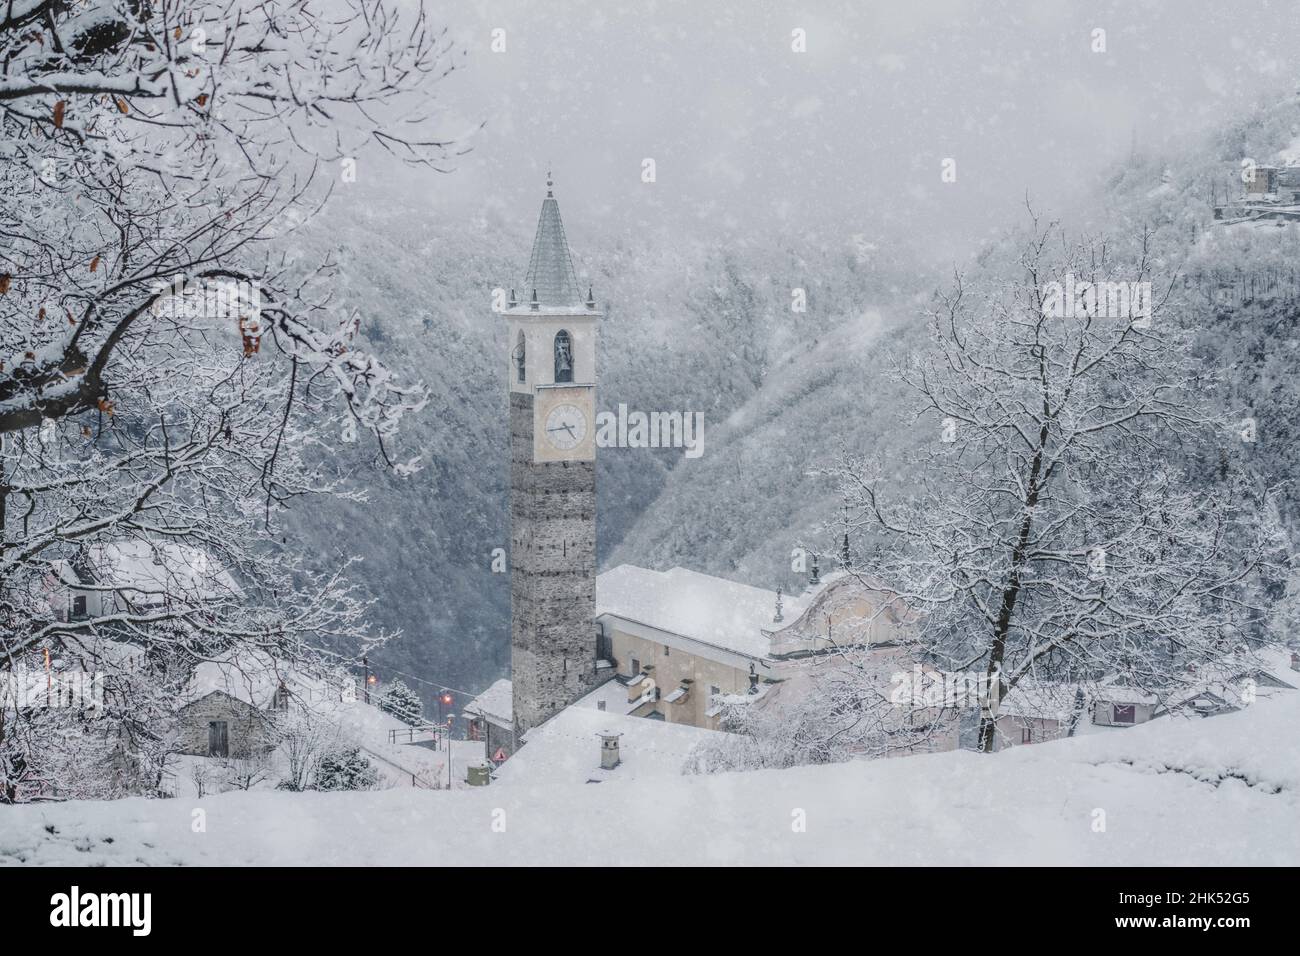 Winter snowfall over trees and old bell tower at Christmas, Sacco, Val Gerola, Valtellina, Sondrio province, Lombardy, Italy, Europe Stock Photo